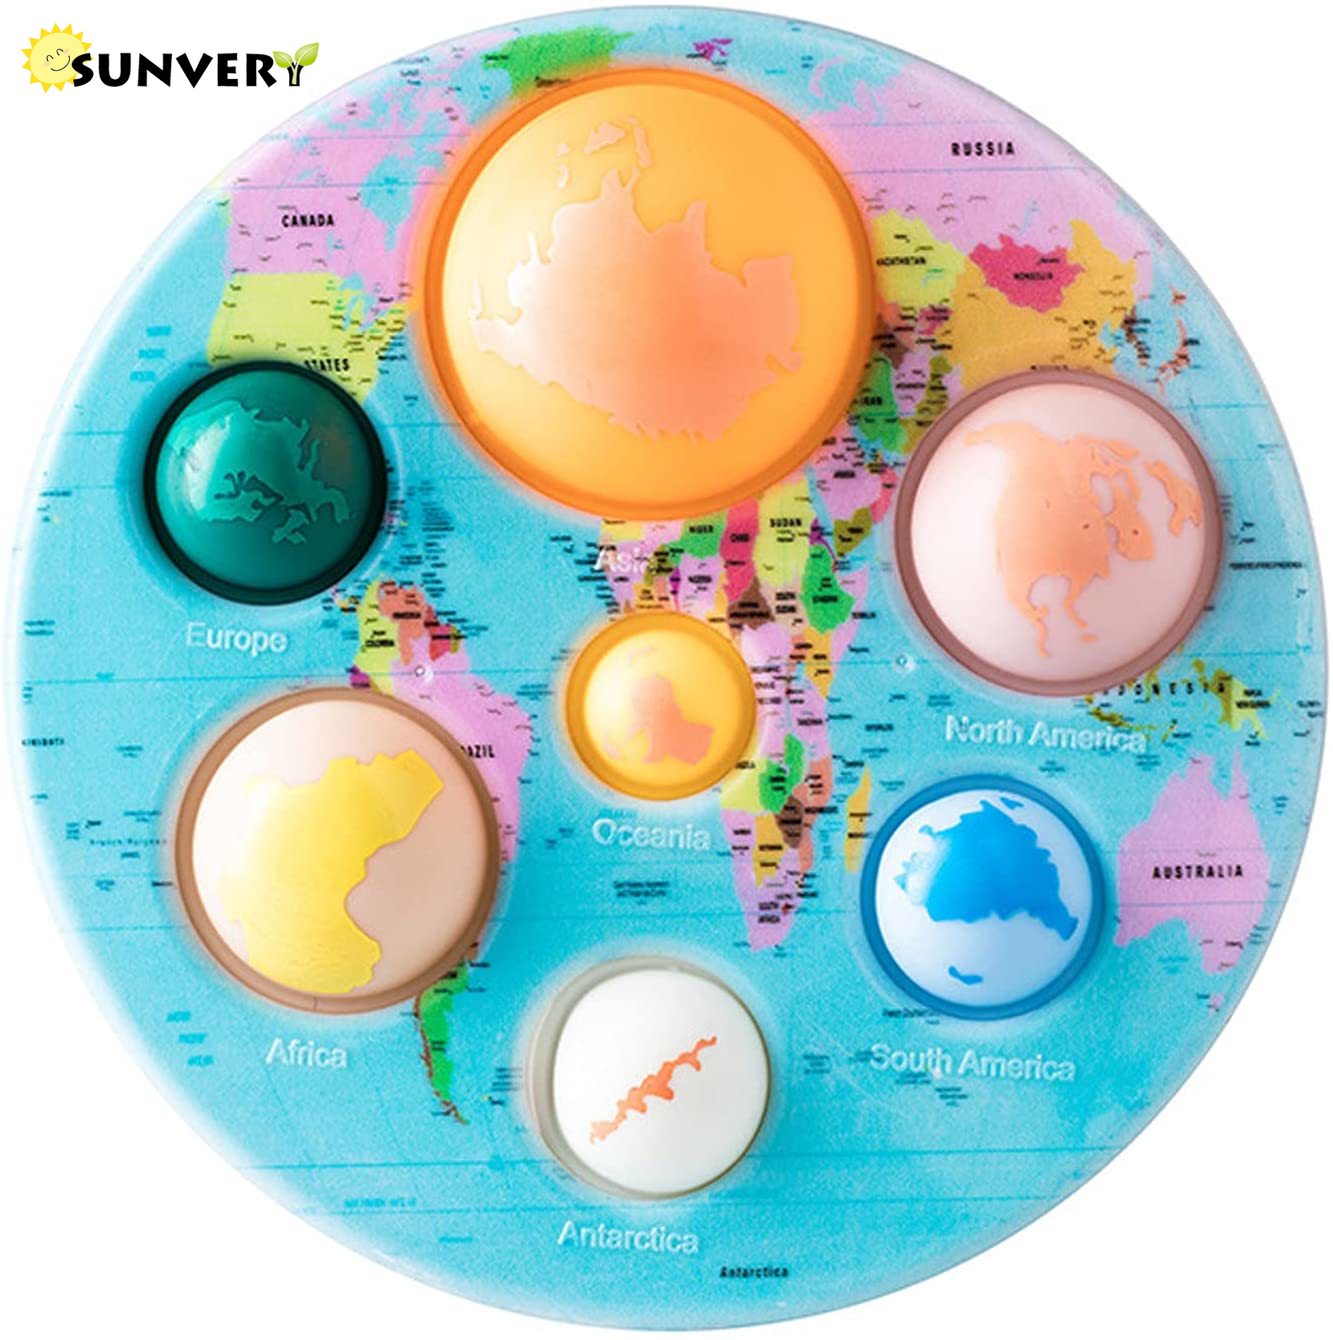 8 Planets Simple Dimple Fidget Toy Simpl dimmer Sensory Push Game Astronomical Trend Autism Toy for ADHD Autism Kids Gift 2021